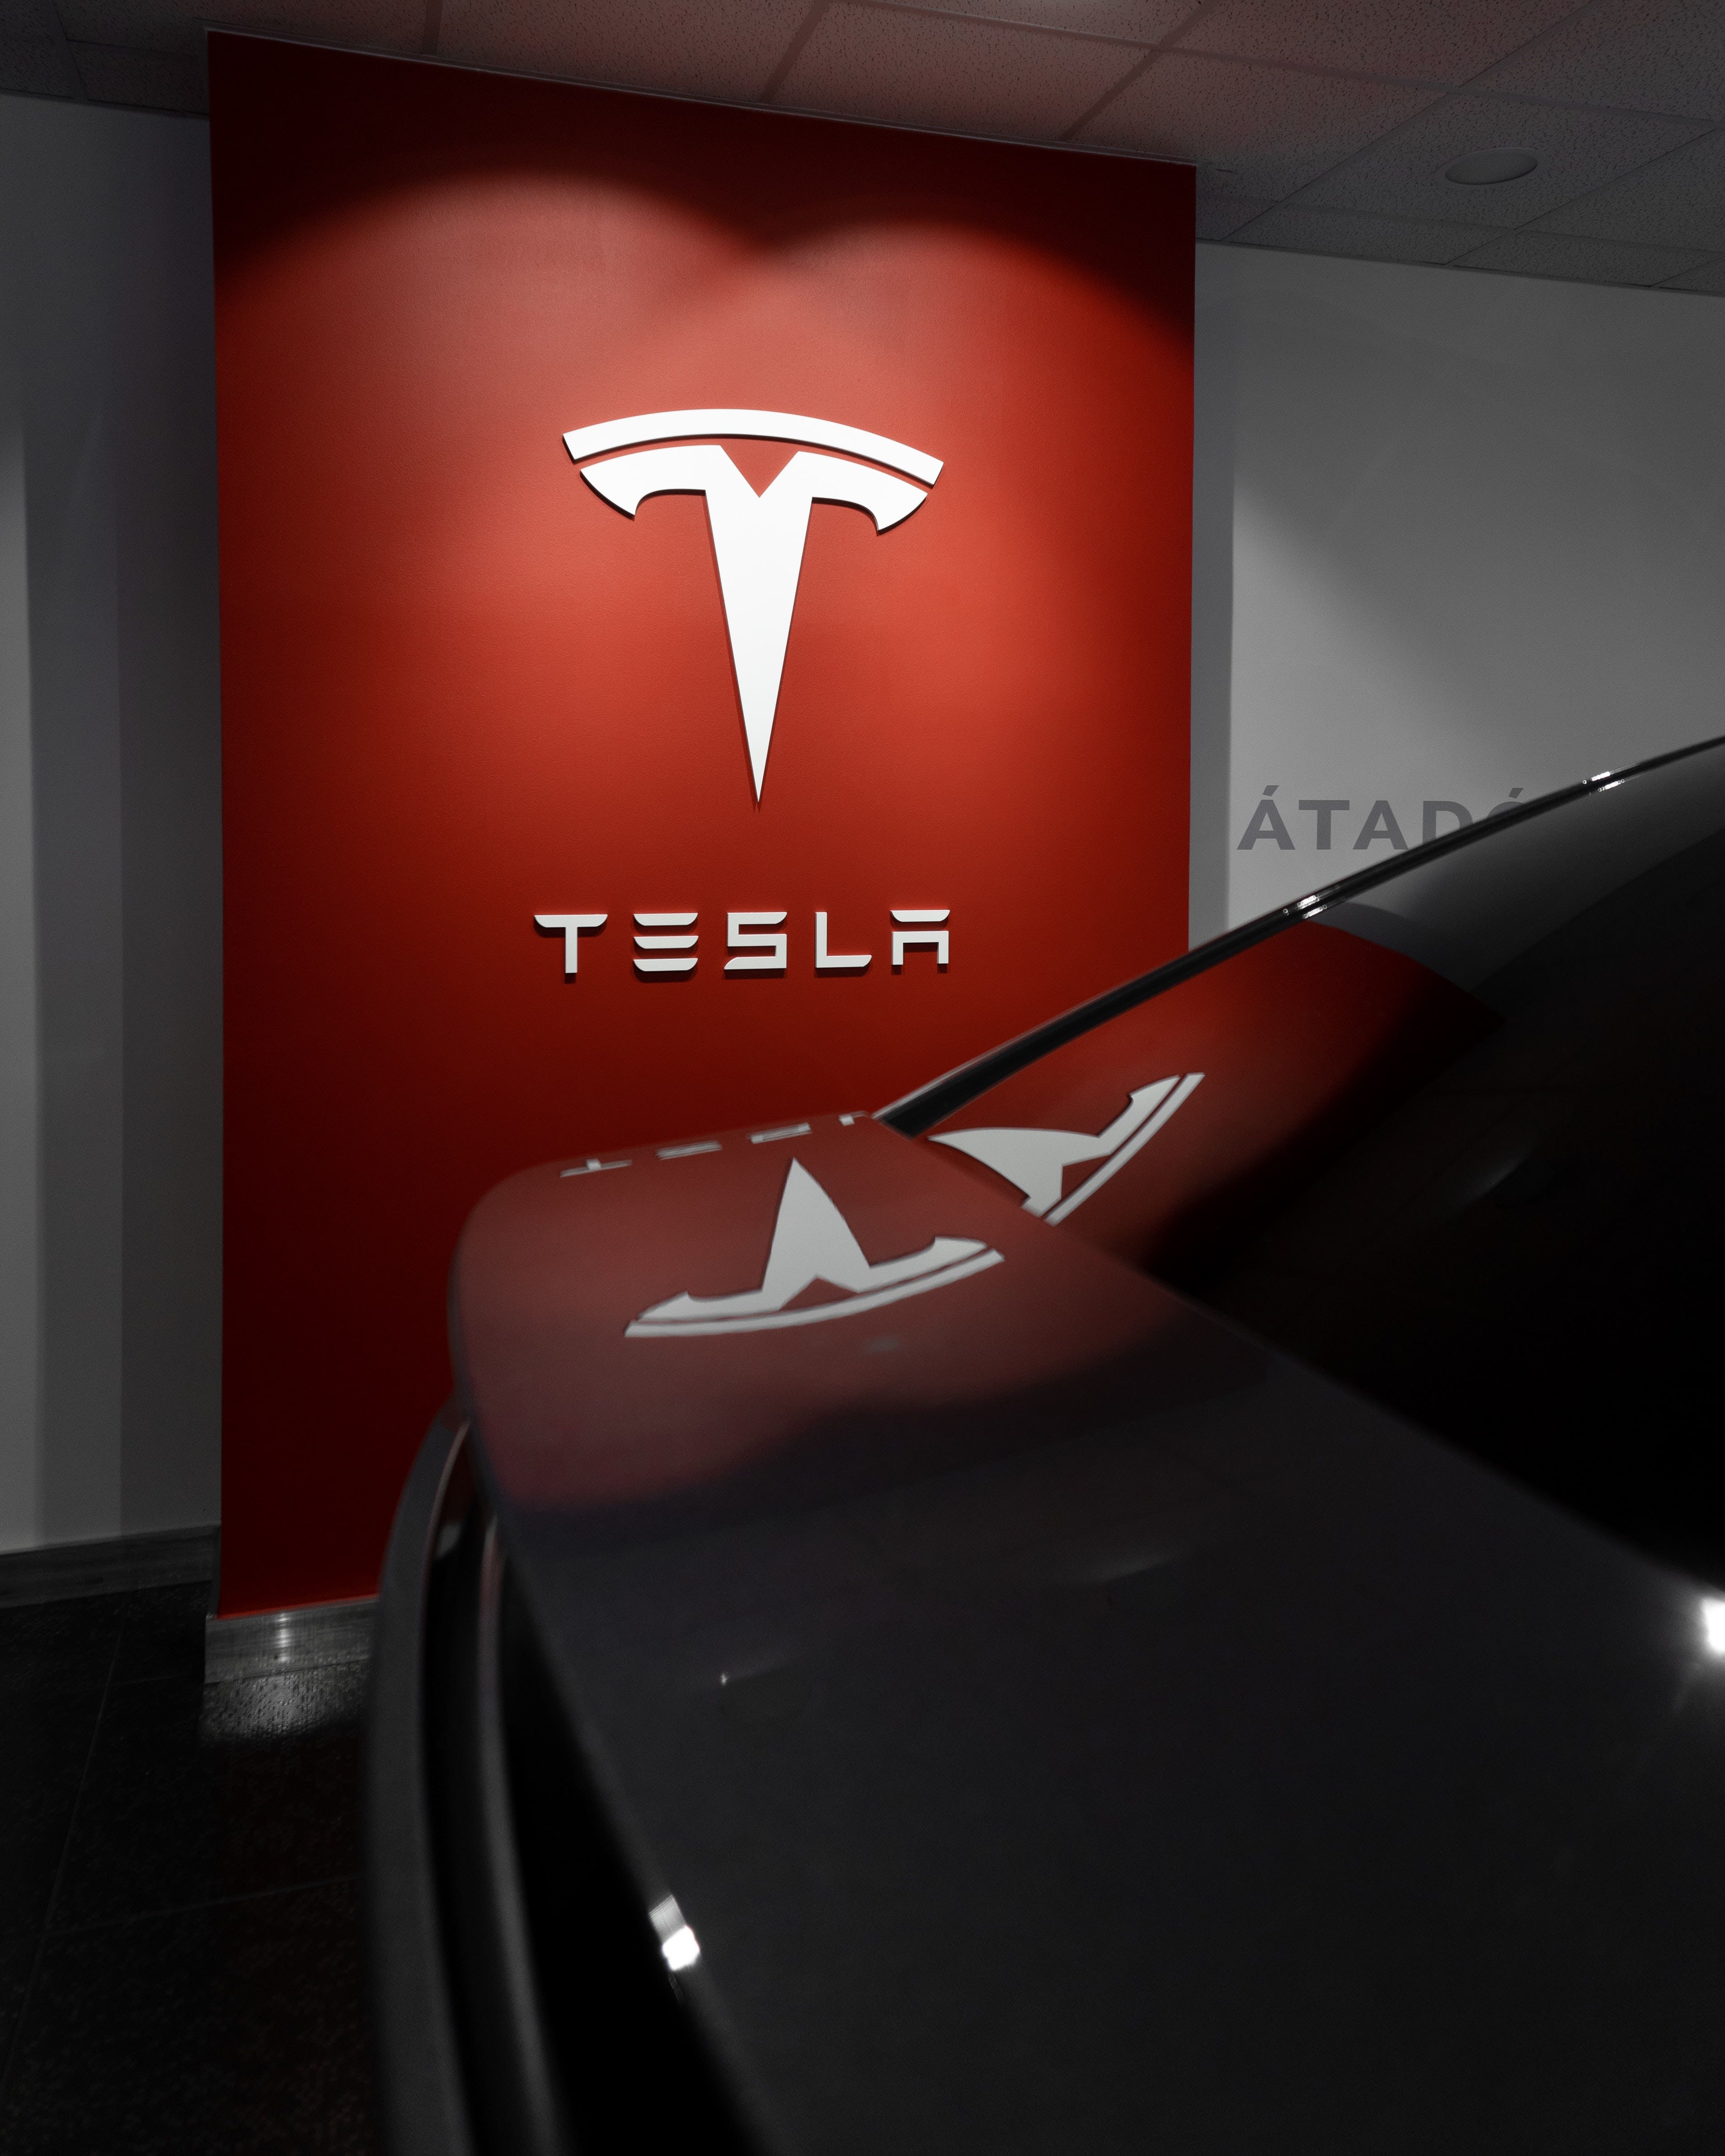 Tesla Seeks To Improve Supply Of Low-Cost Batteries In Deal With China's EVE Energy: Report